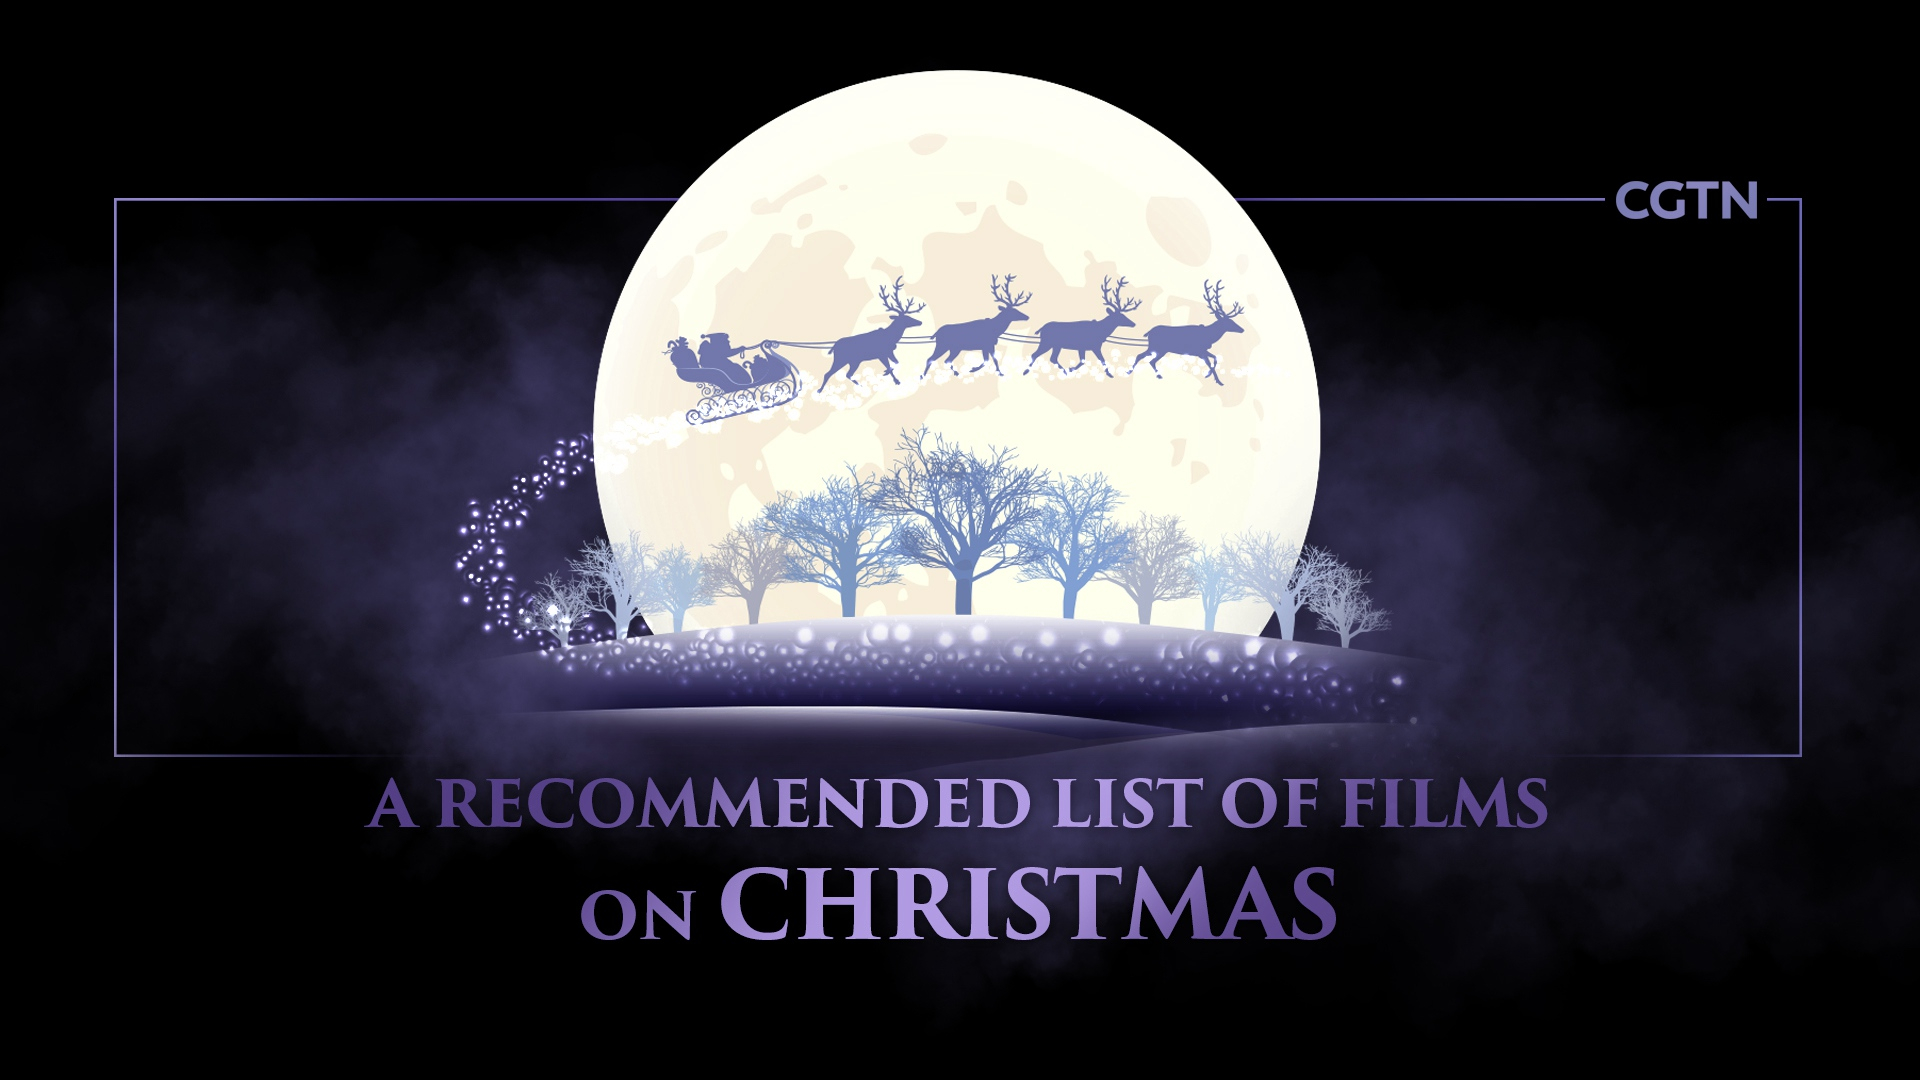 Which Movie Are You Planning To Watch During Christmas Holidays